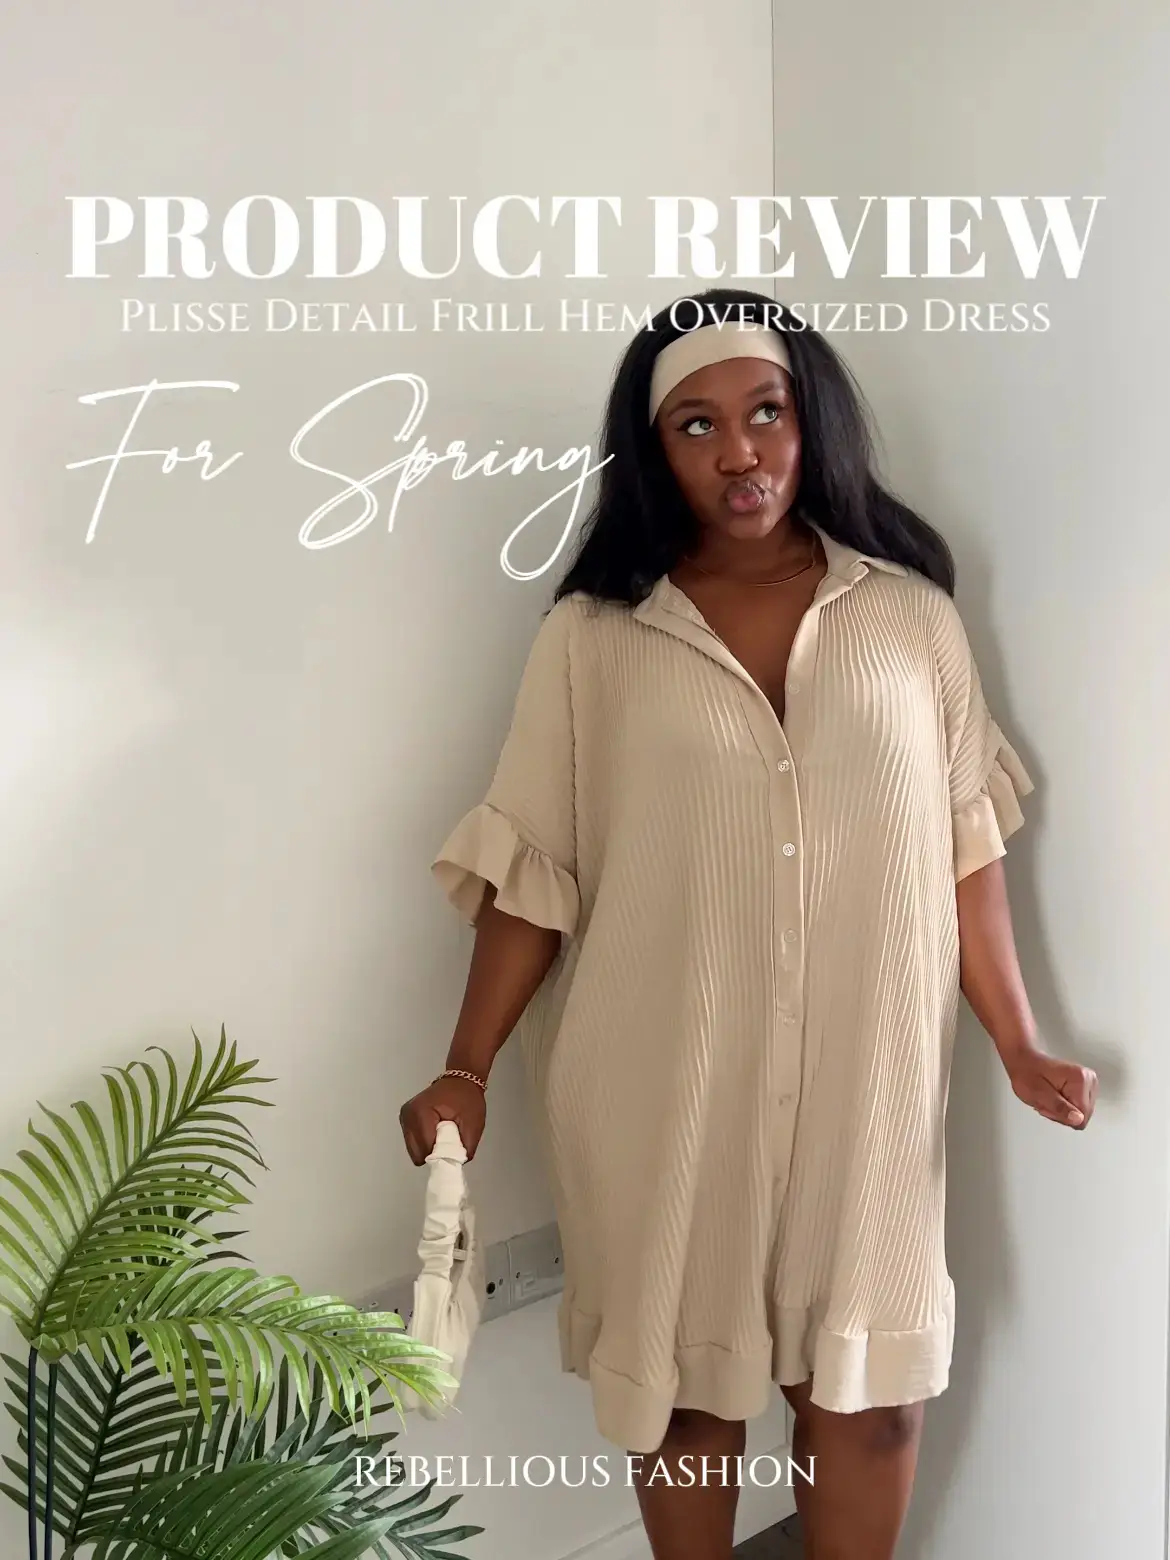 REVIEWING REBELLIOUS FASHION OVERSIZED DRESS